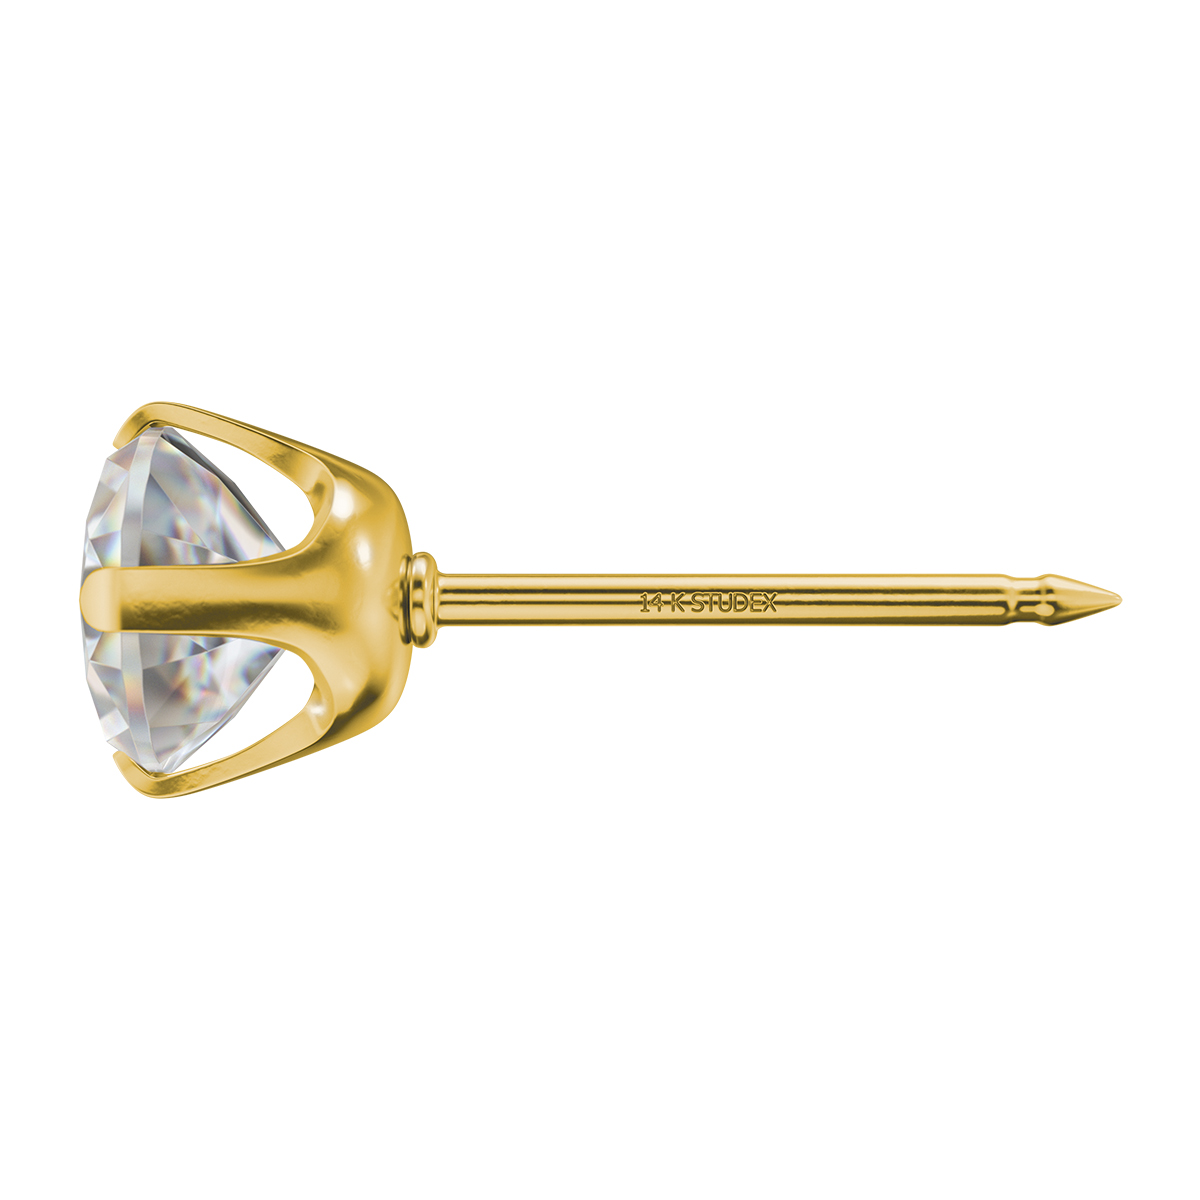 System 75 ear studs 14 ct yellow gold